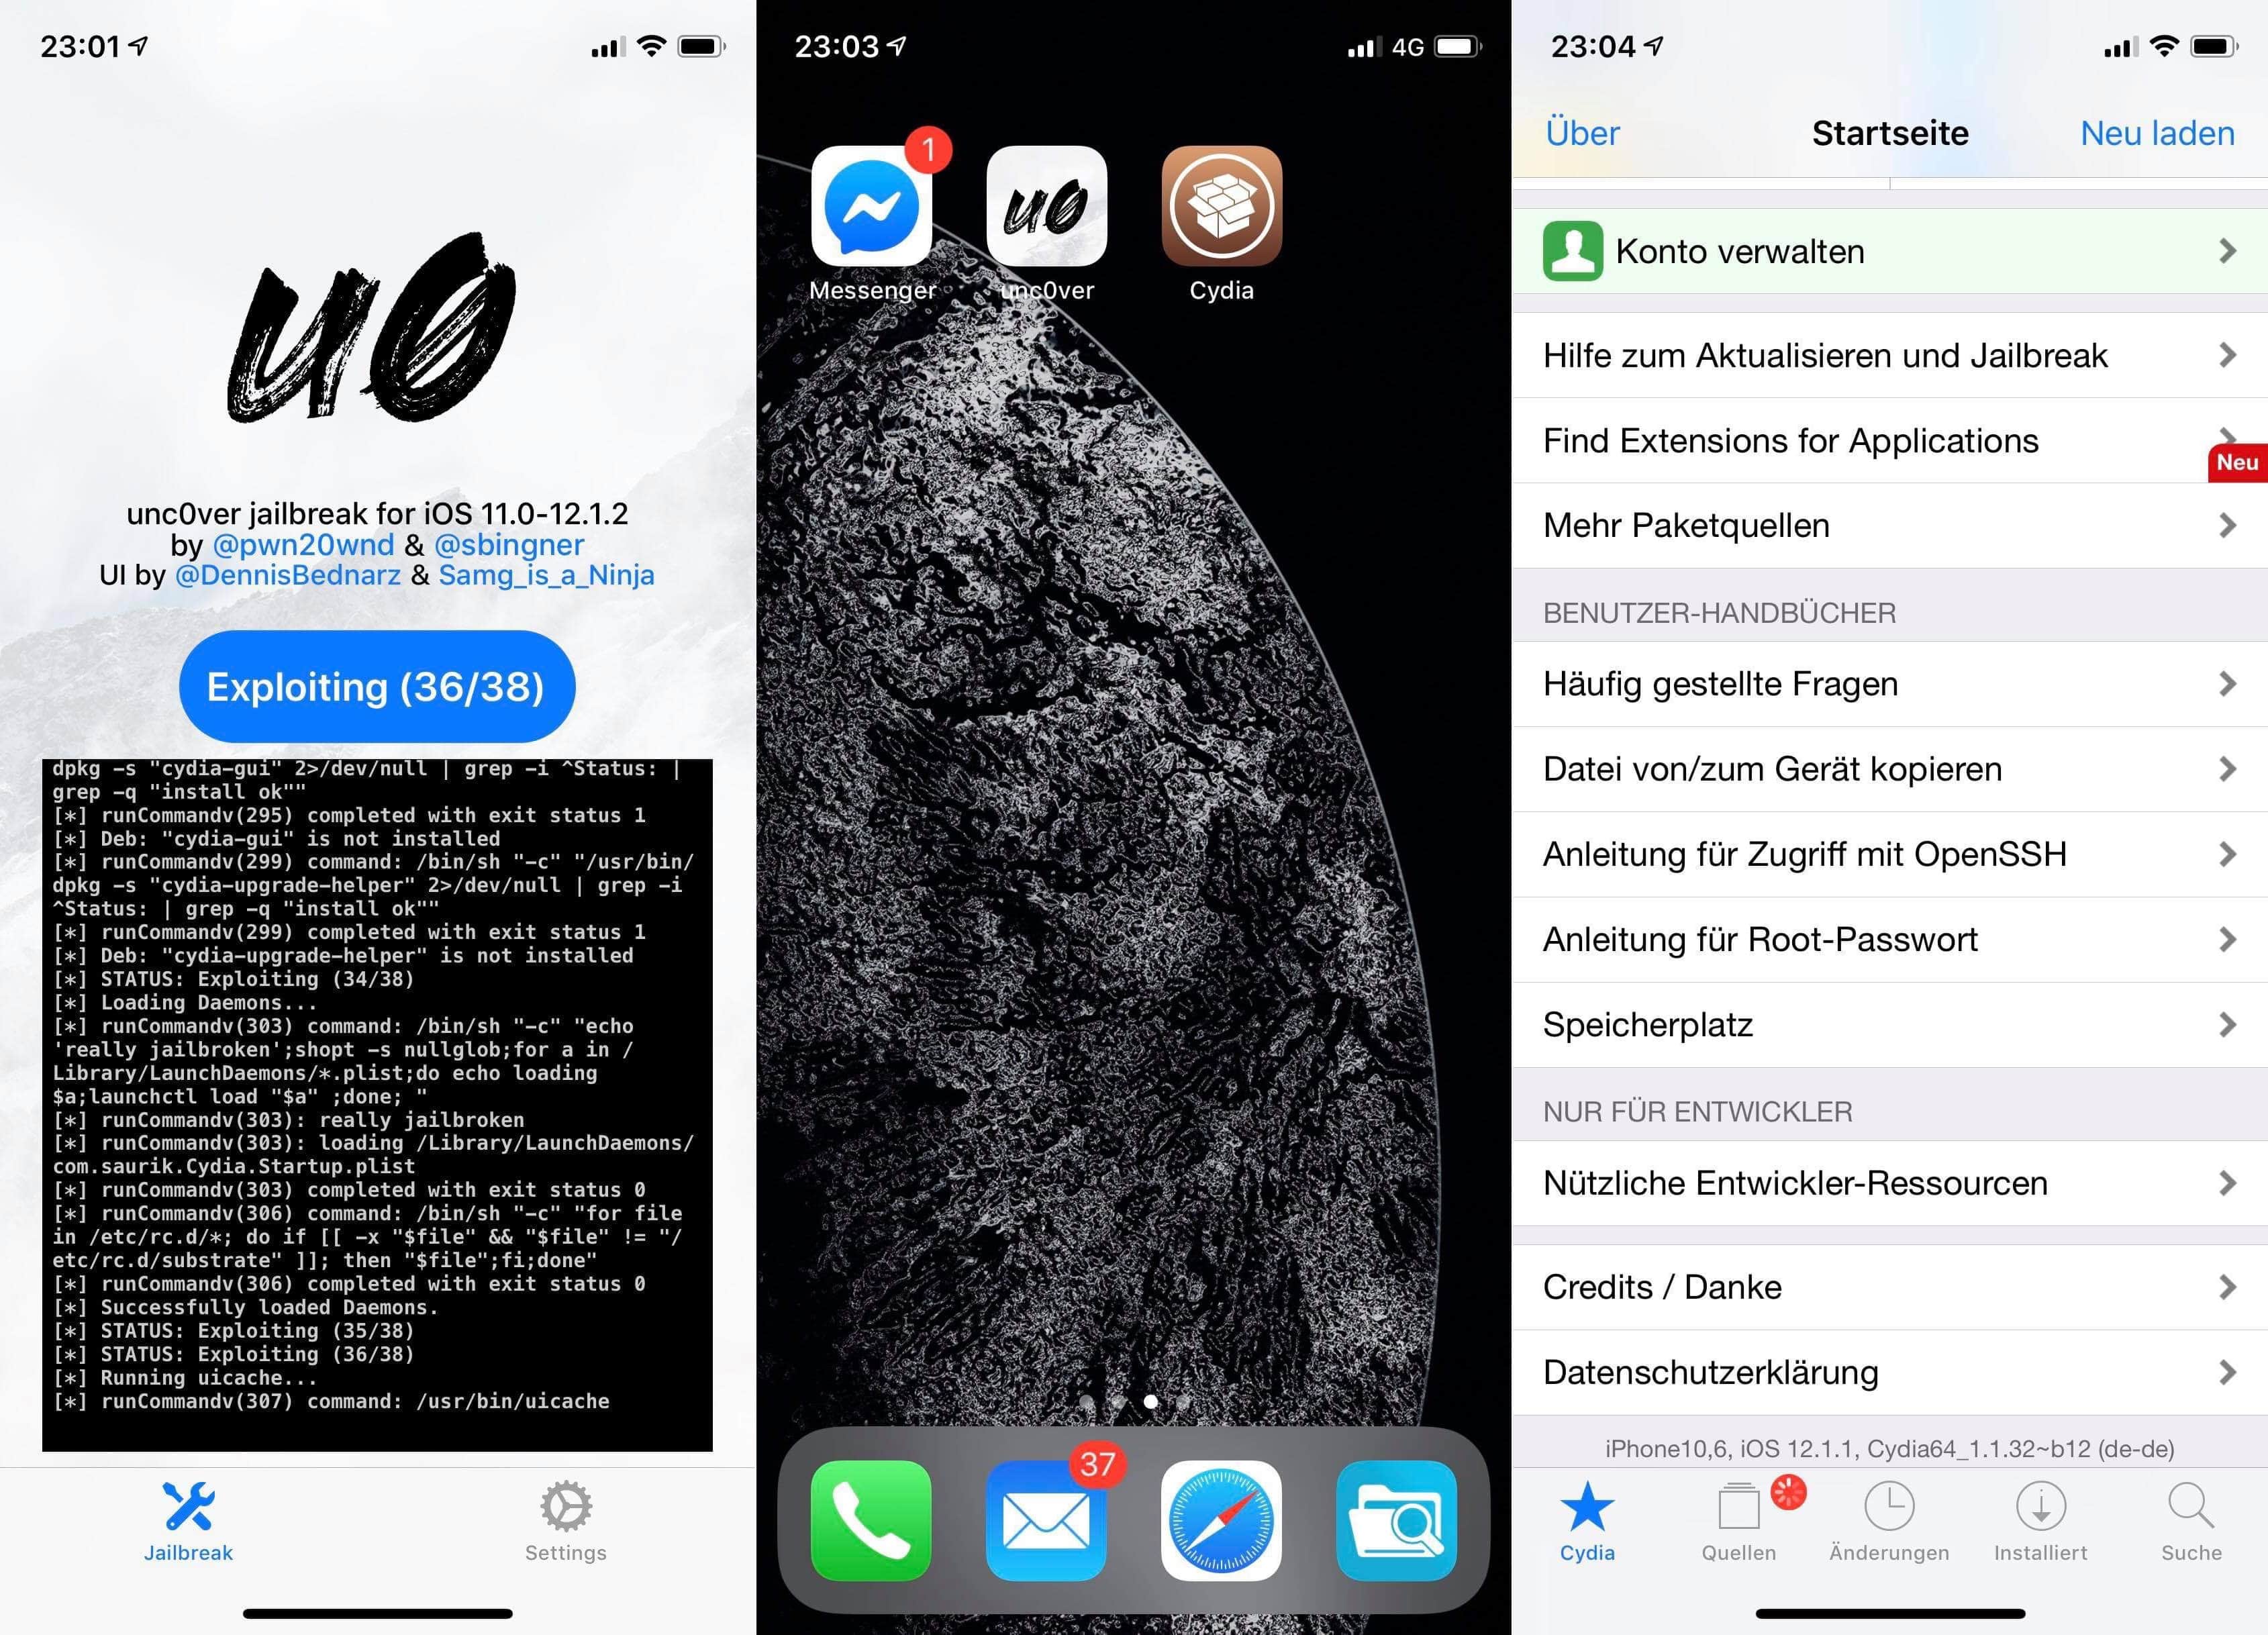 iOS 12 Jailbreak with unc0ver v3.0.0 - Tutorial, Hack4Life, Fabian Geissler, step-by-step, iPhone XS, iPhone XS Max, A12, Status, pwn20wnd, Cydia, Tutorial, Help, Support